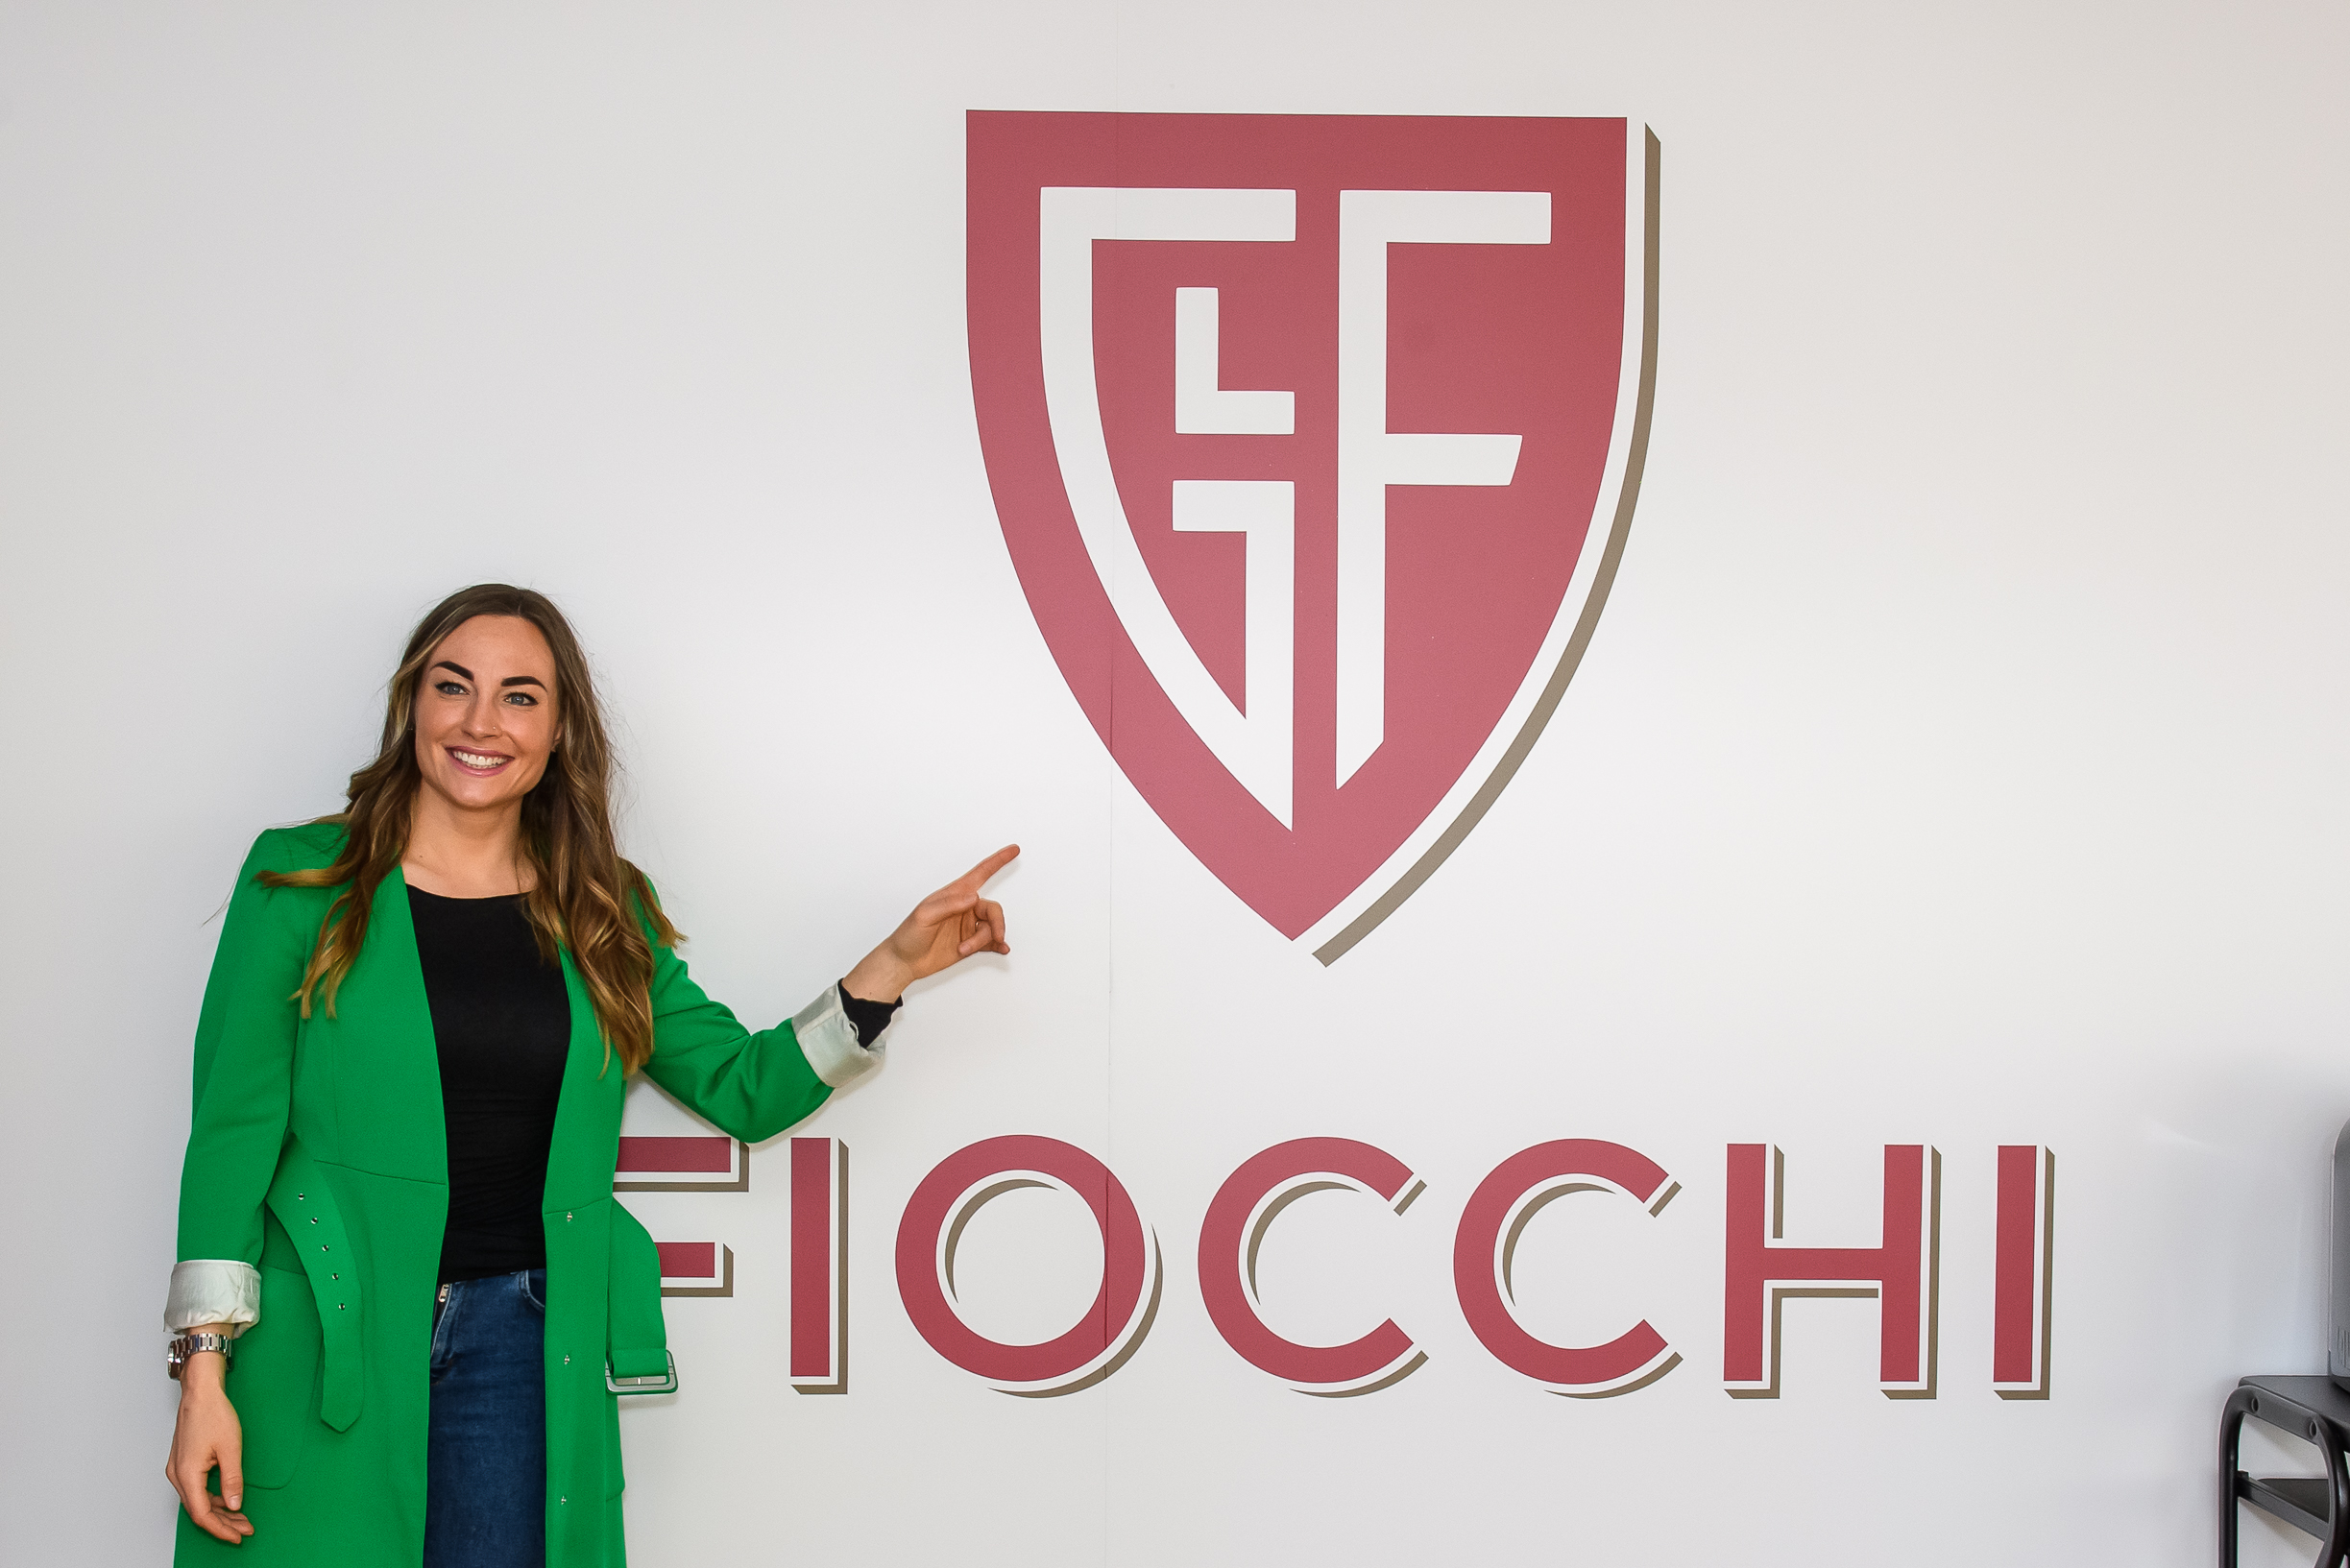 DOROTHEA WIERER SPECIAL GUEST OF FIOCCHI